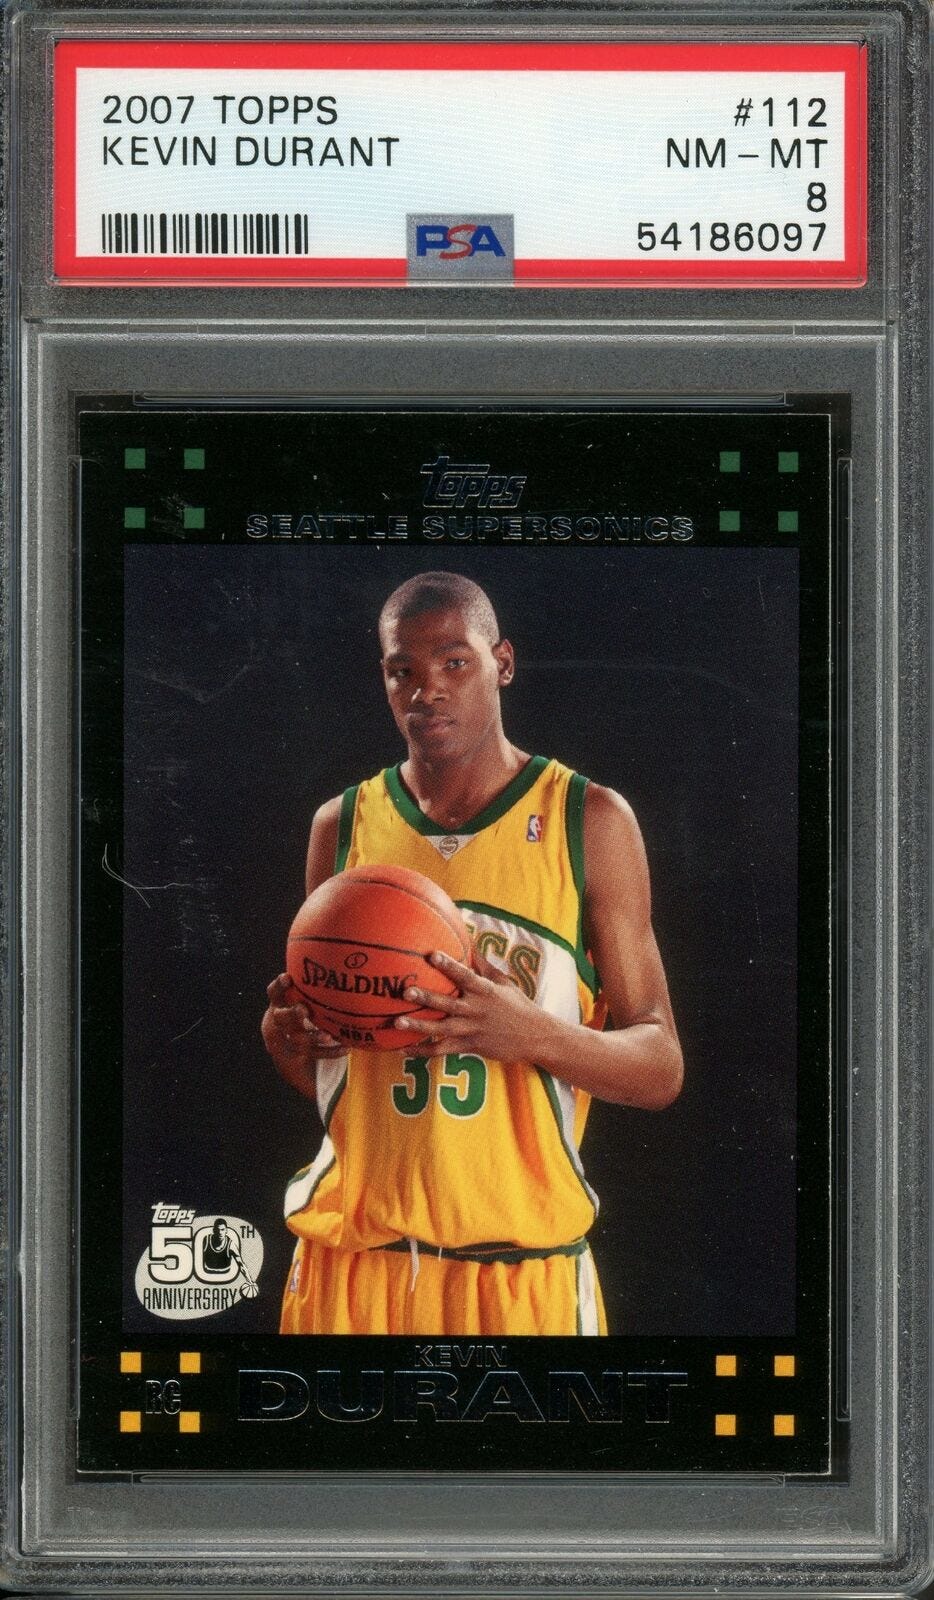 Image 1 - 2007 Topps Kevin Durant RC PSA 8 NM-MT #112